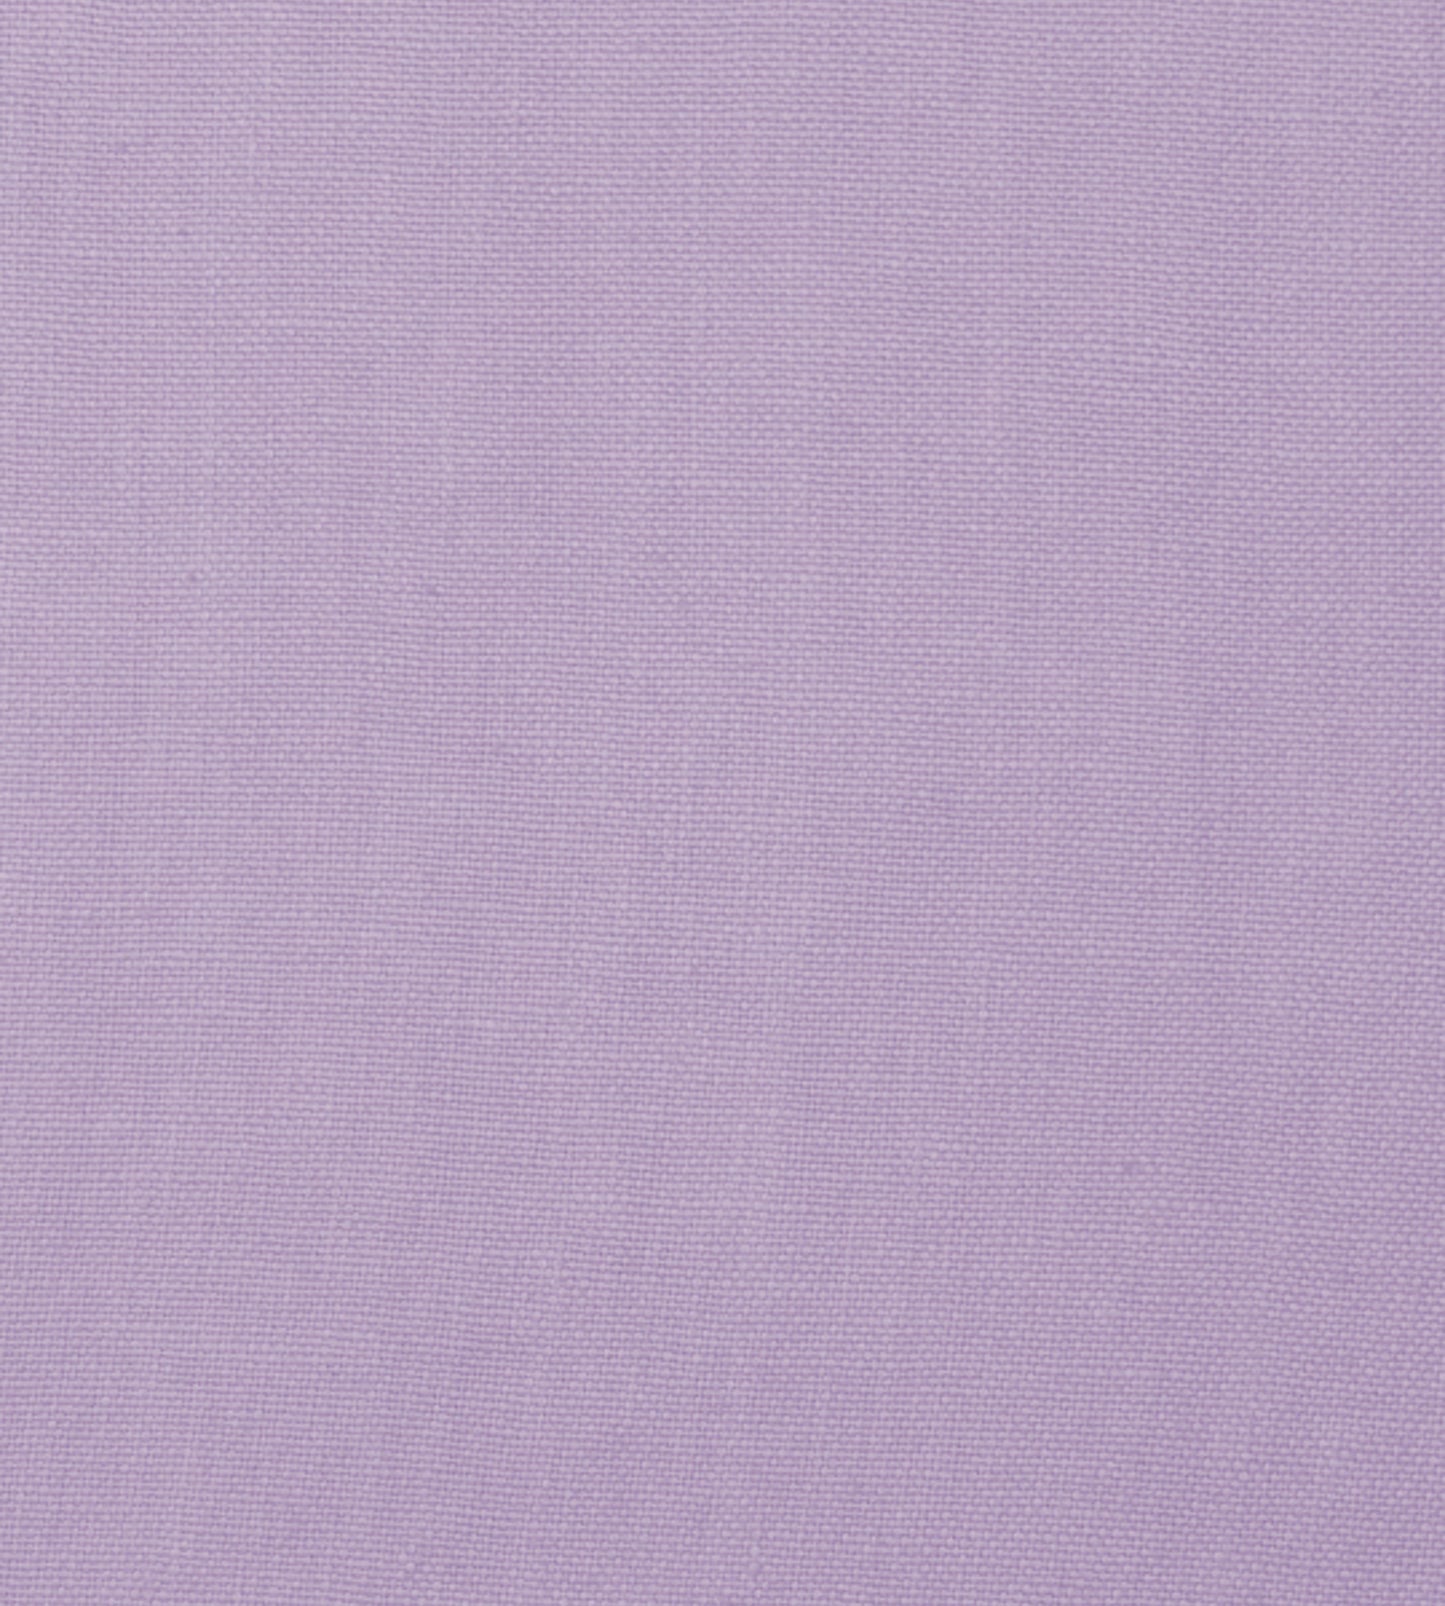 Purchase Scalamandre Fabric Product SC 001827108, Toscana Linen Lavender 1